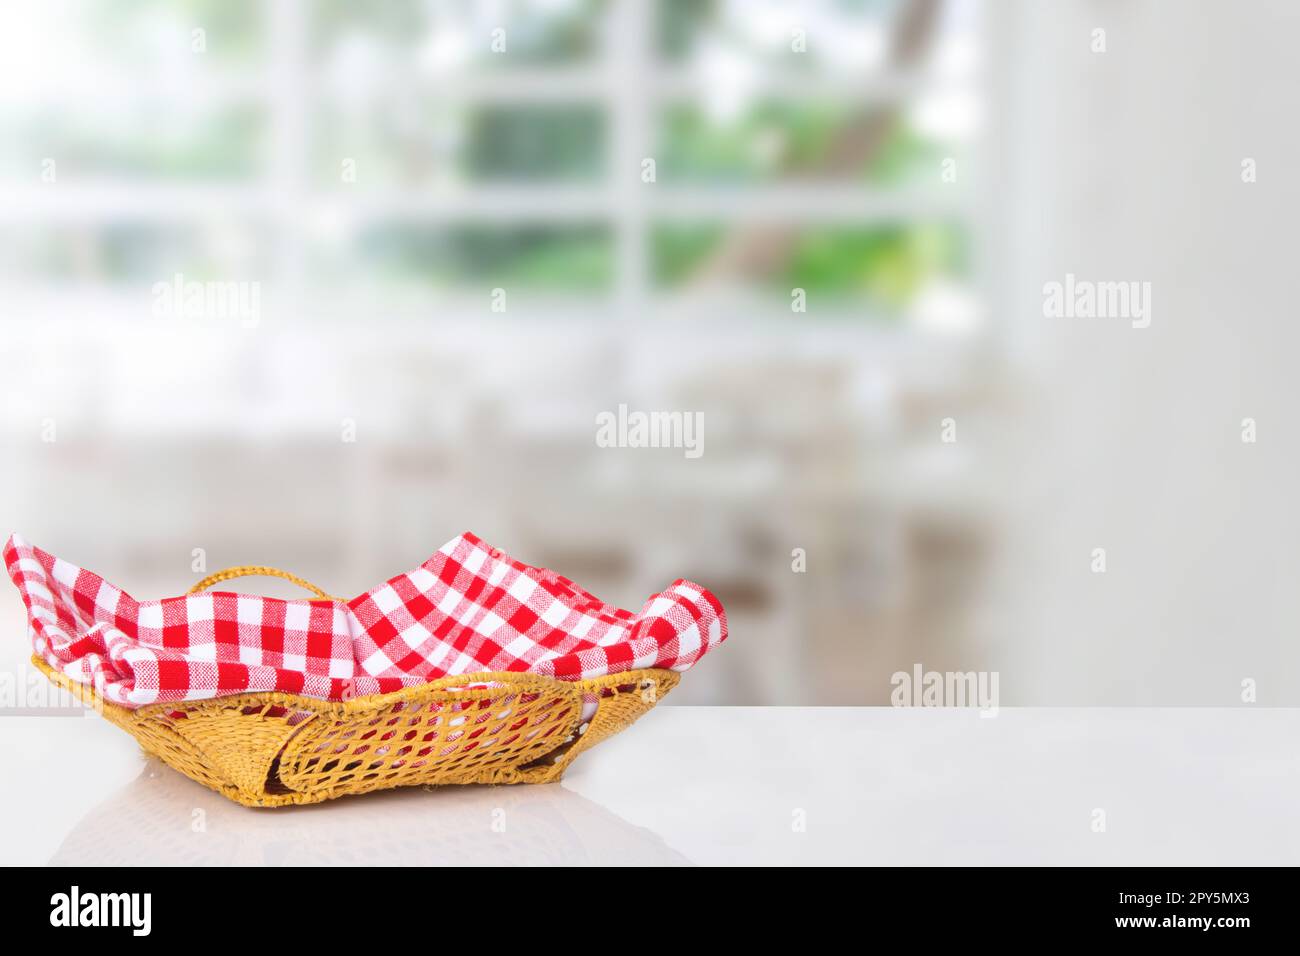 Empty picnic basket. Close-up of a empty straw basket with a checkered red napkin on table over blurred kitchen background. For your food and product display montage. Stock Photo